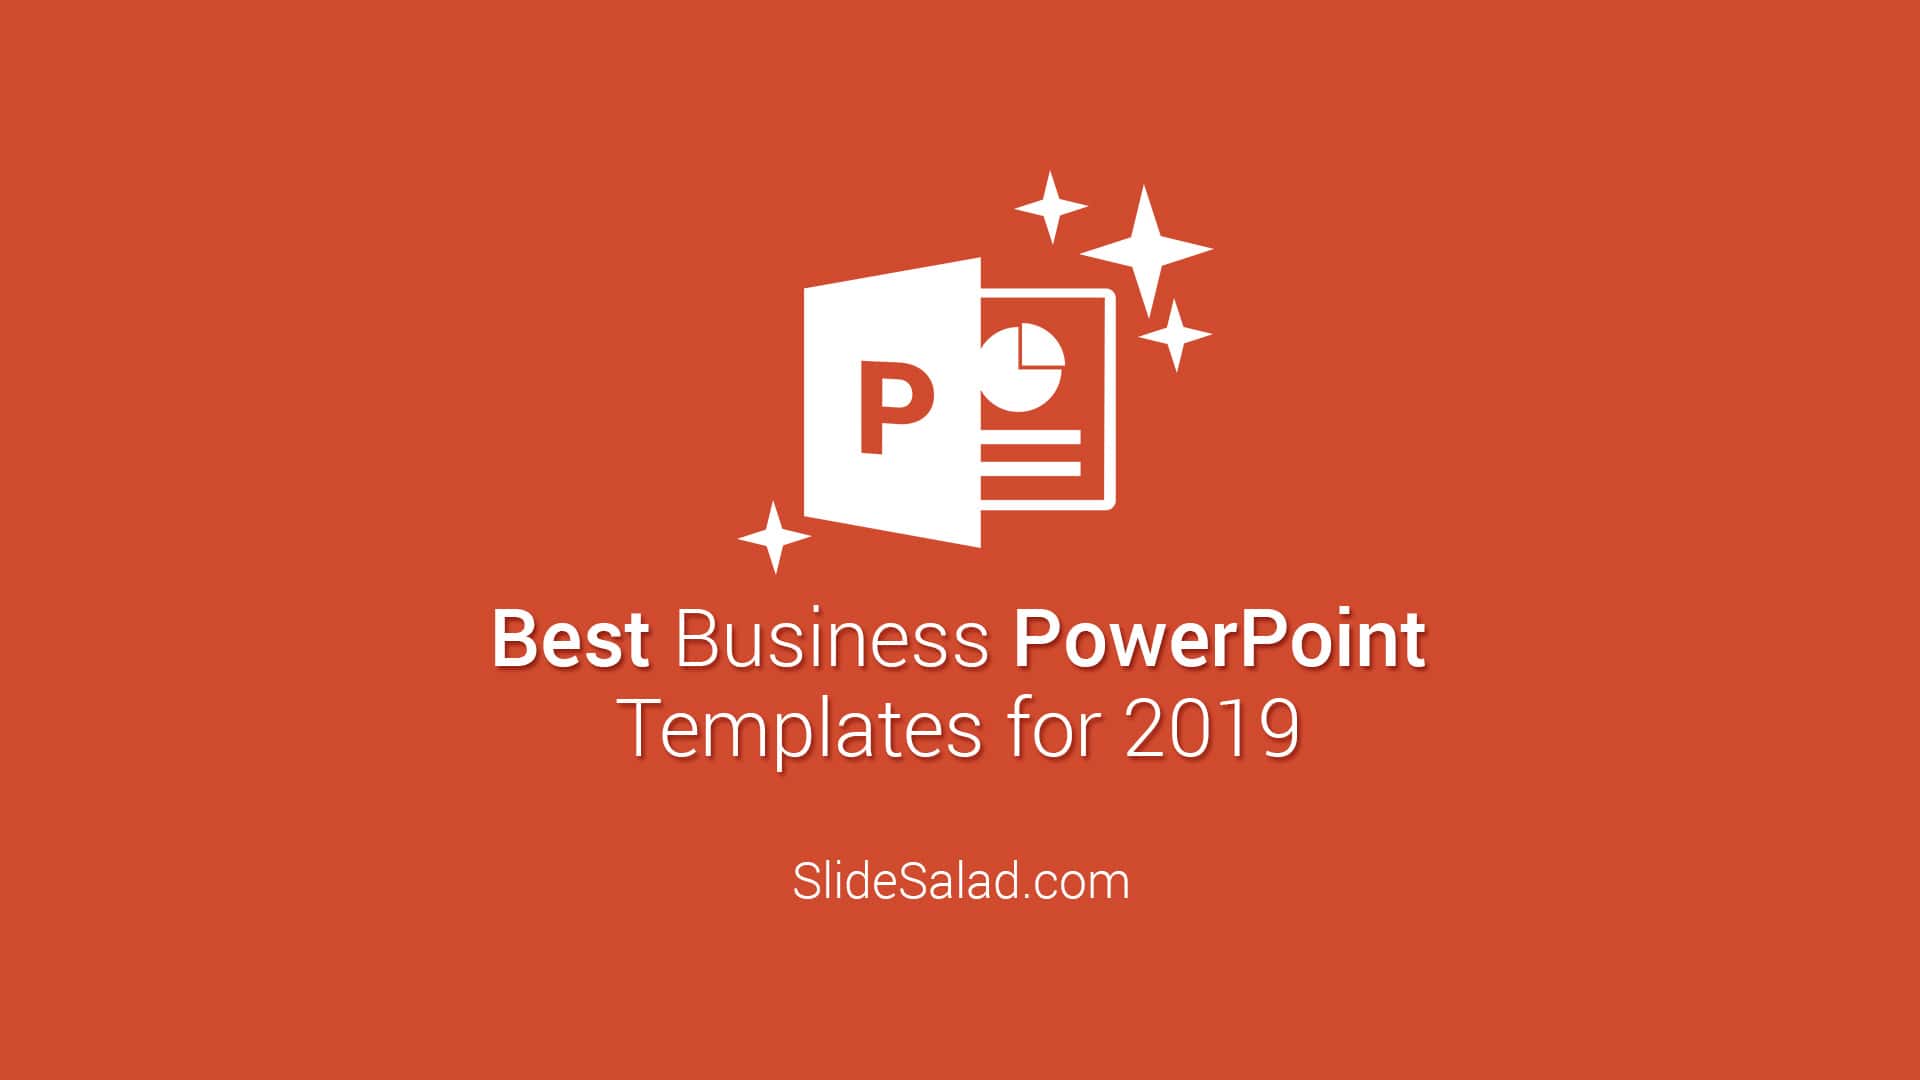 Best Business PowerPoint Templates for 2019